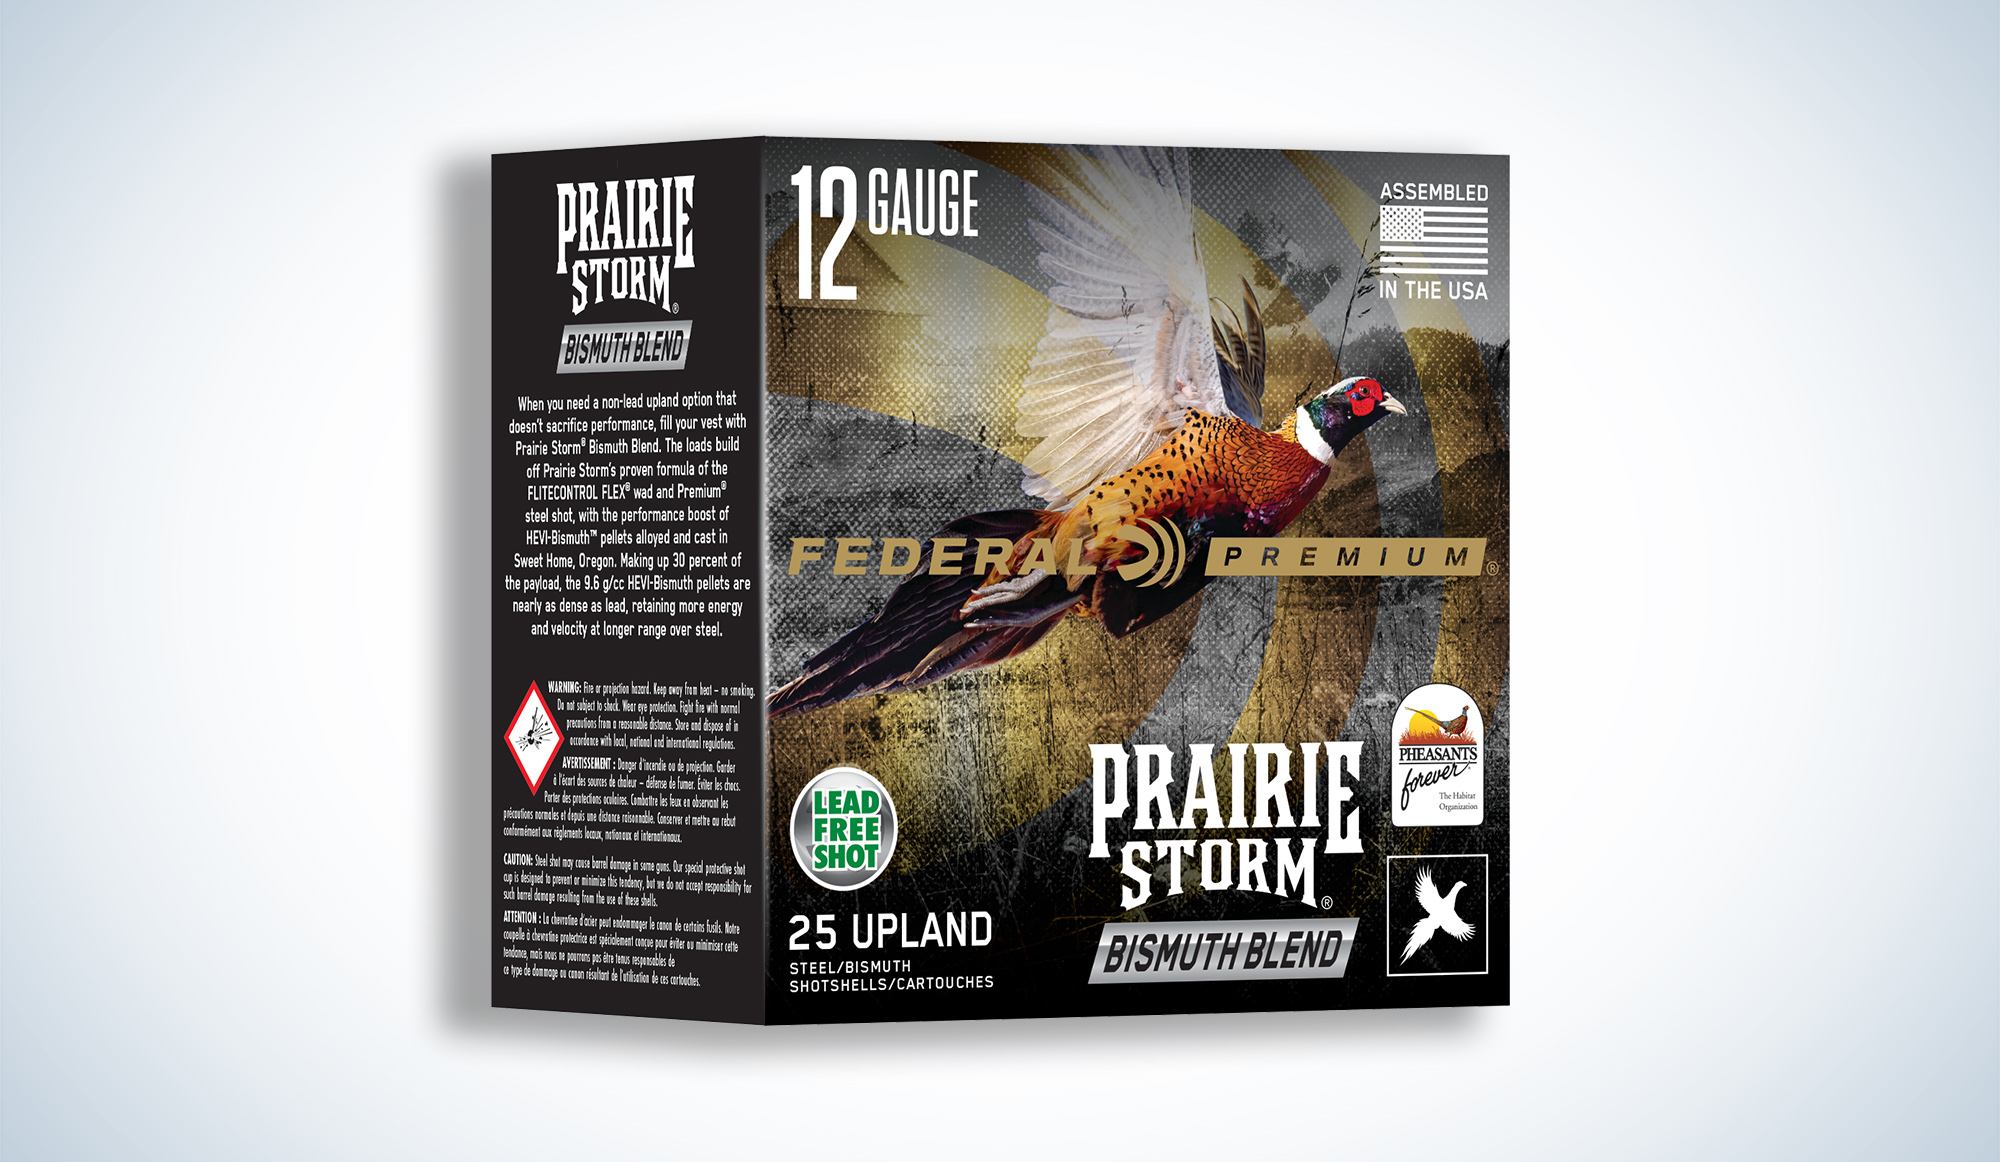 A box of federal upland ammo with a pheasant on it.